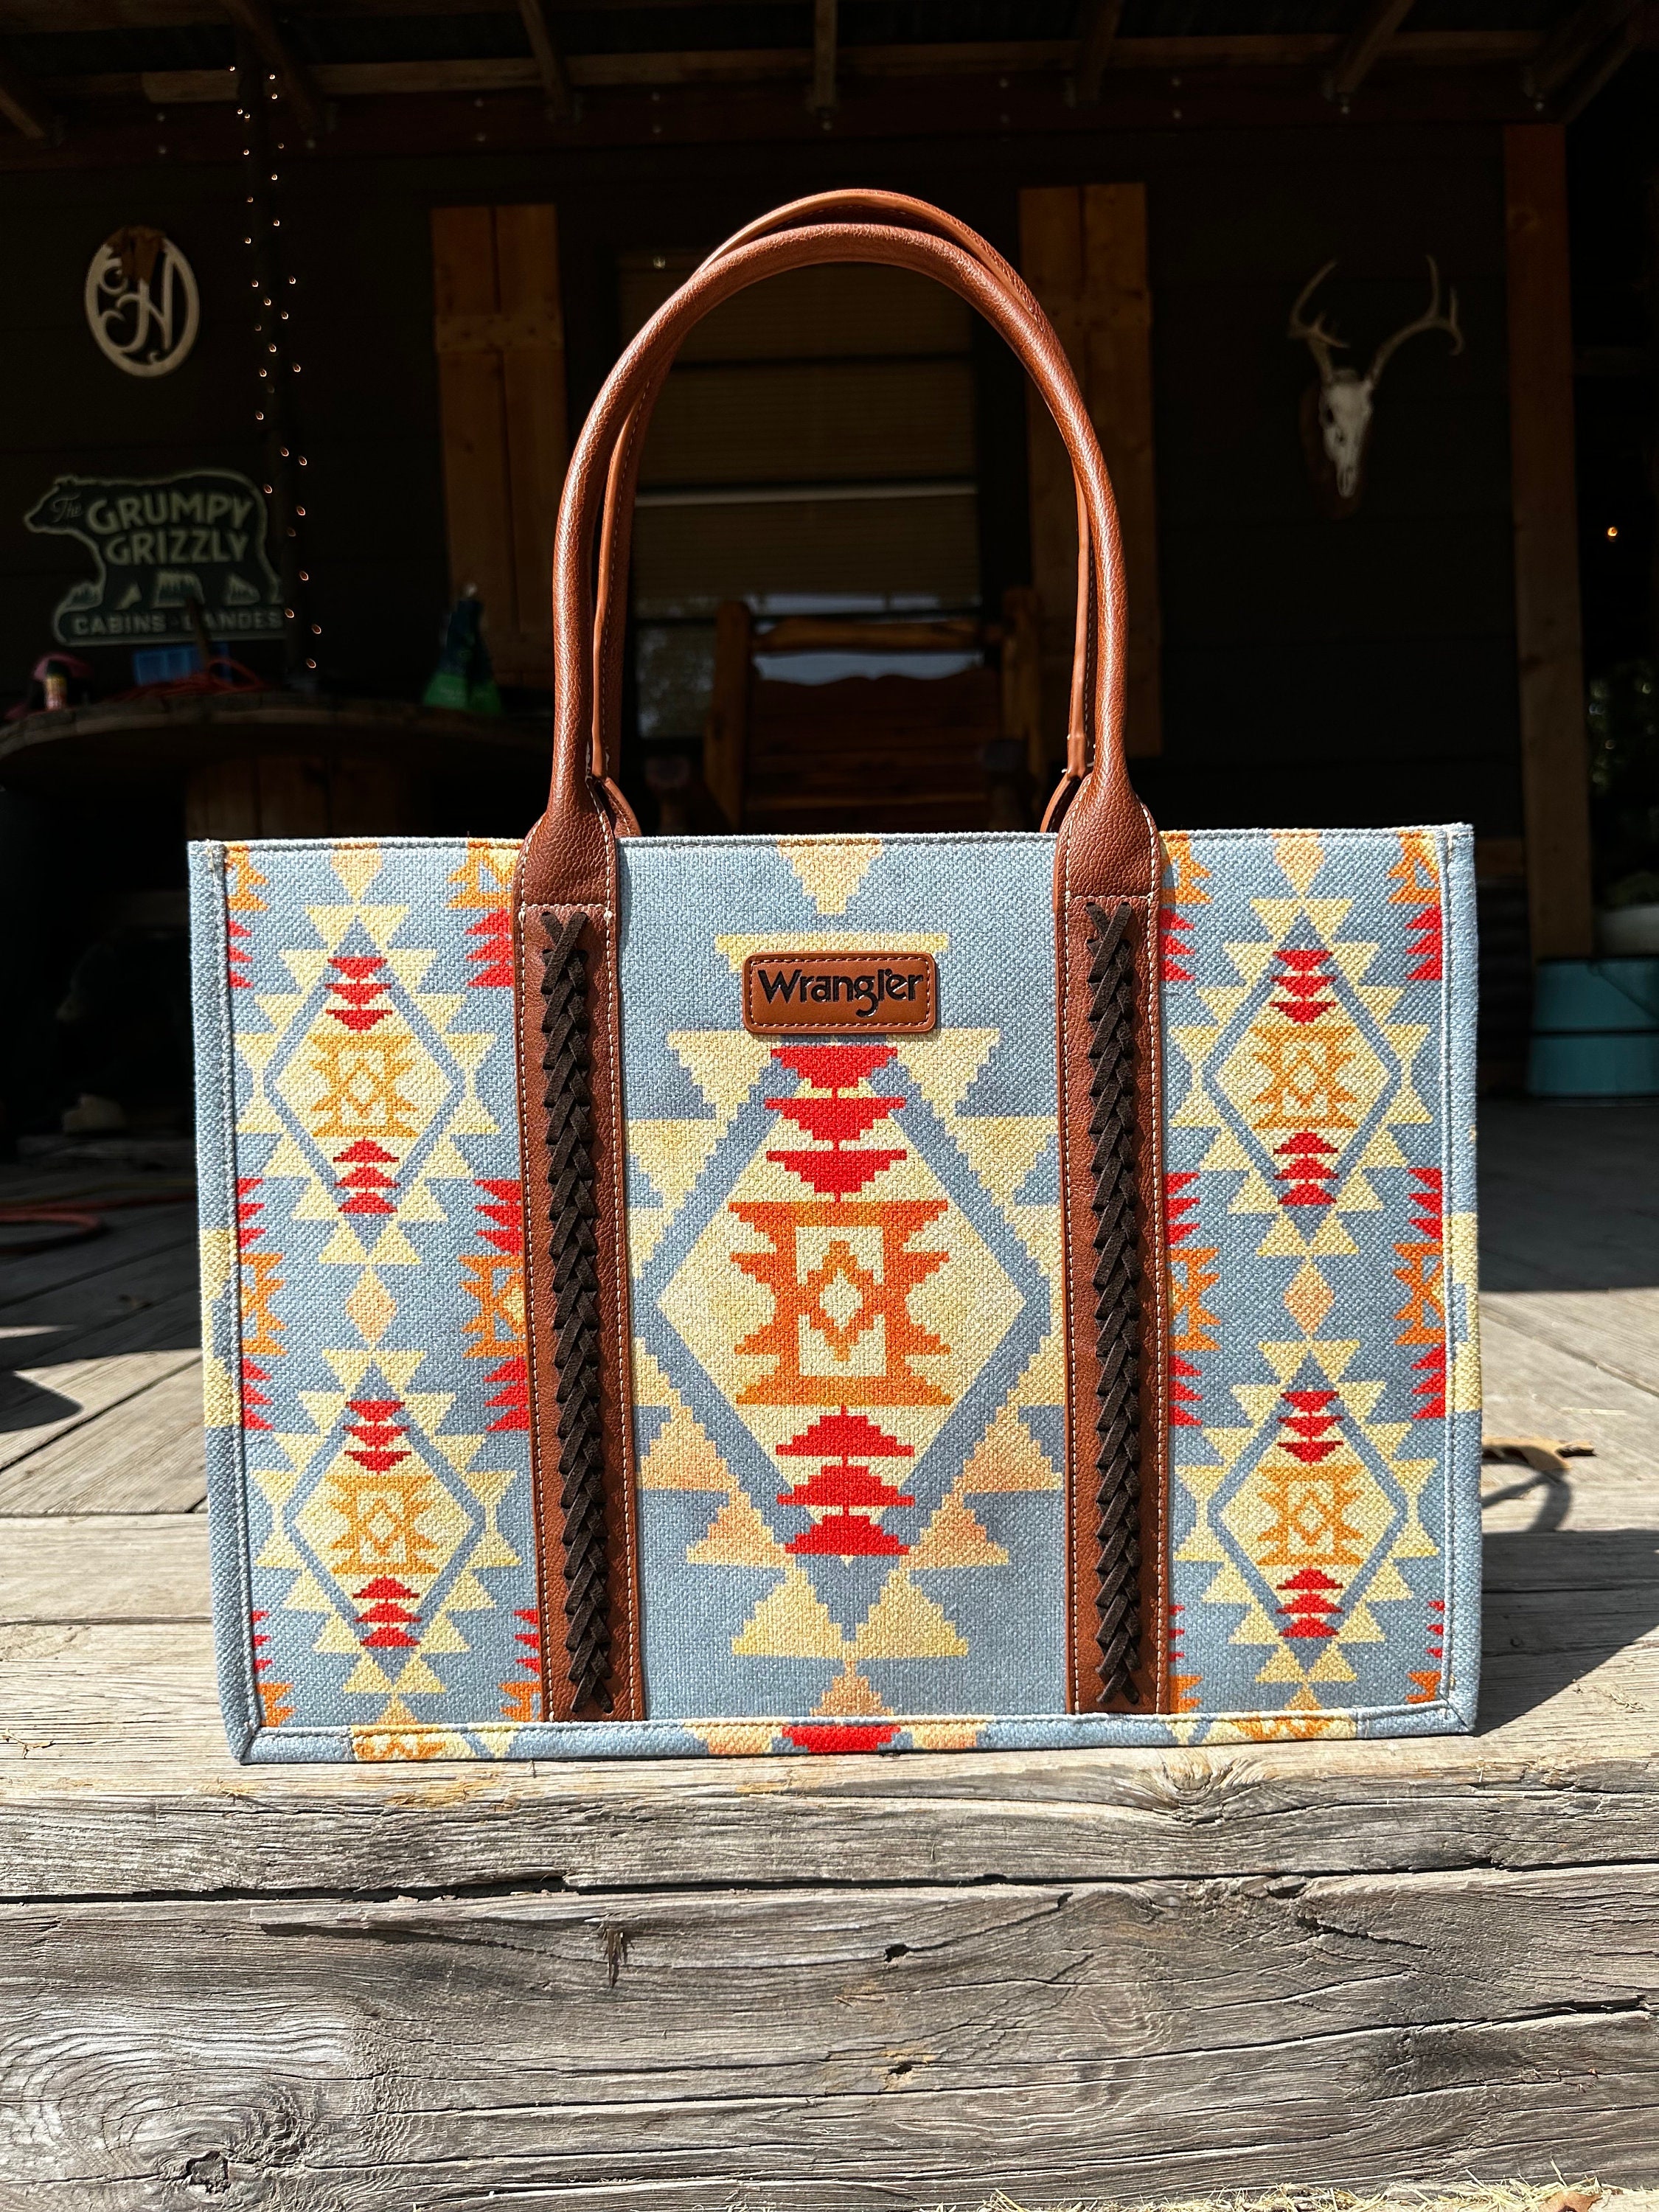 The viral Wrangler tote in turquoise is everything! #wrangler #wrangle